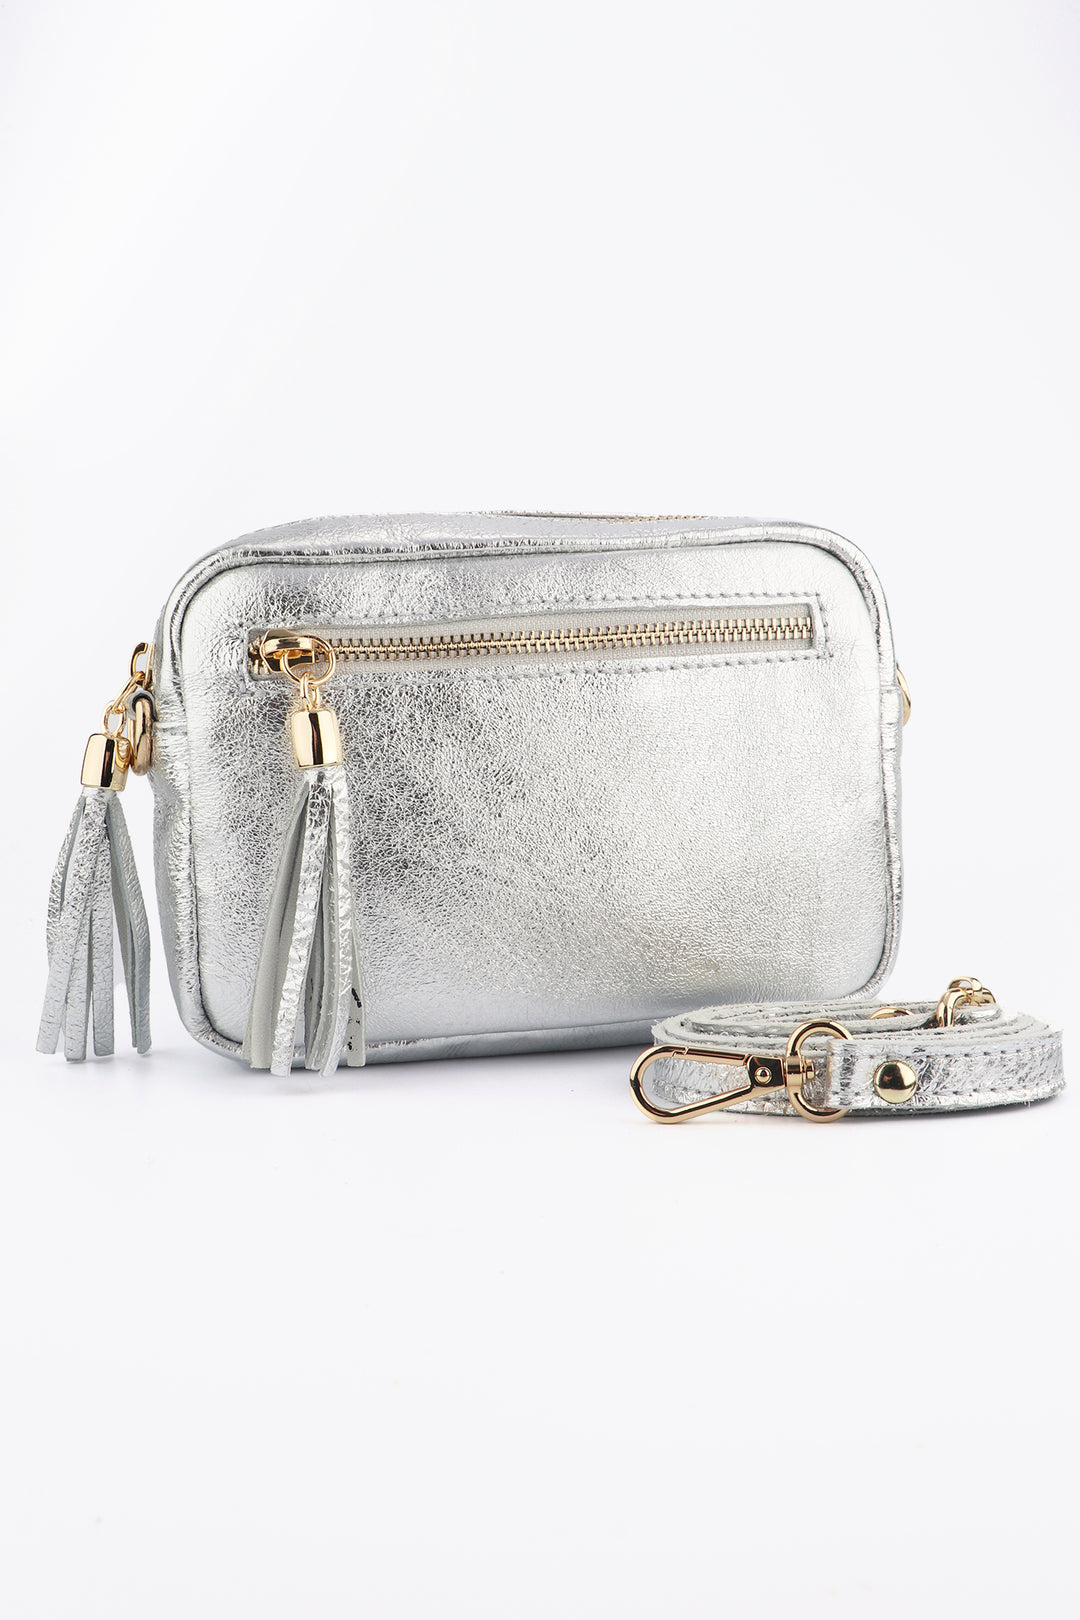 silver leather crossbody camera bag with two zip closing compartments and tassles with a cross body detachable strap